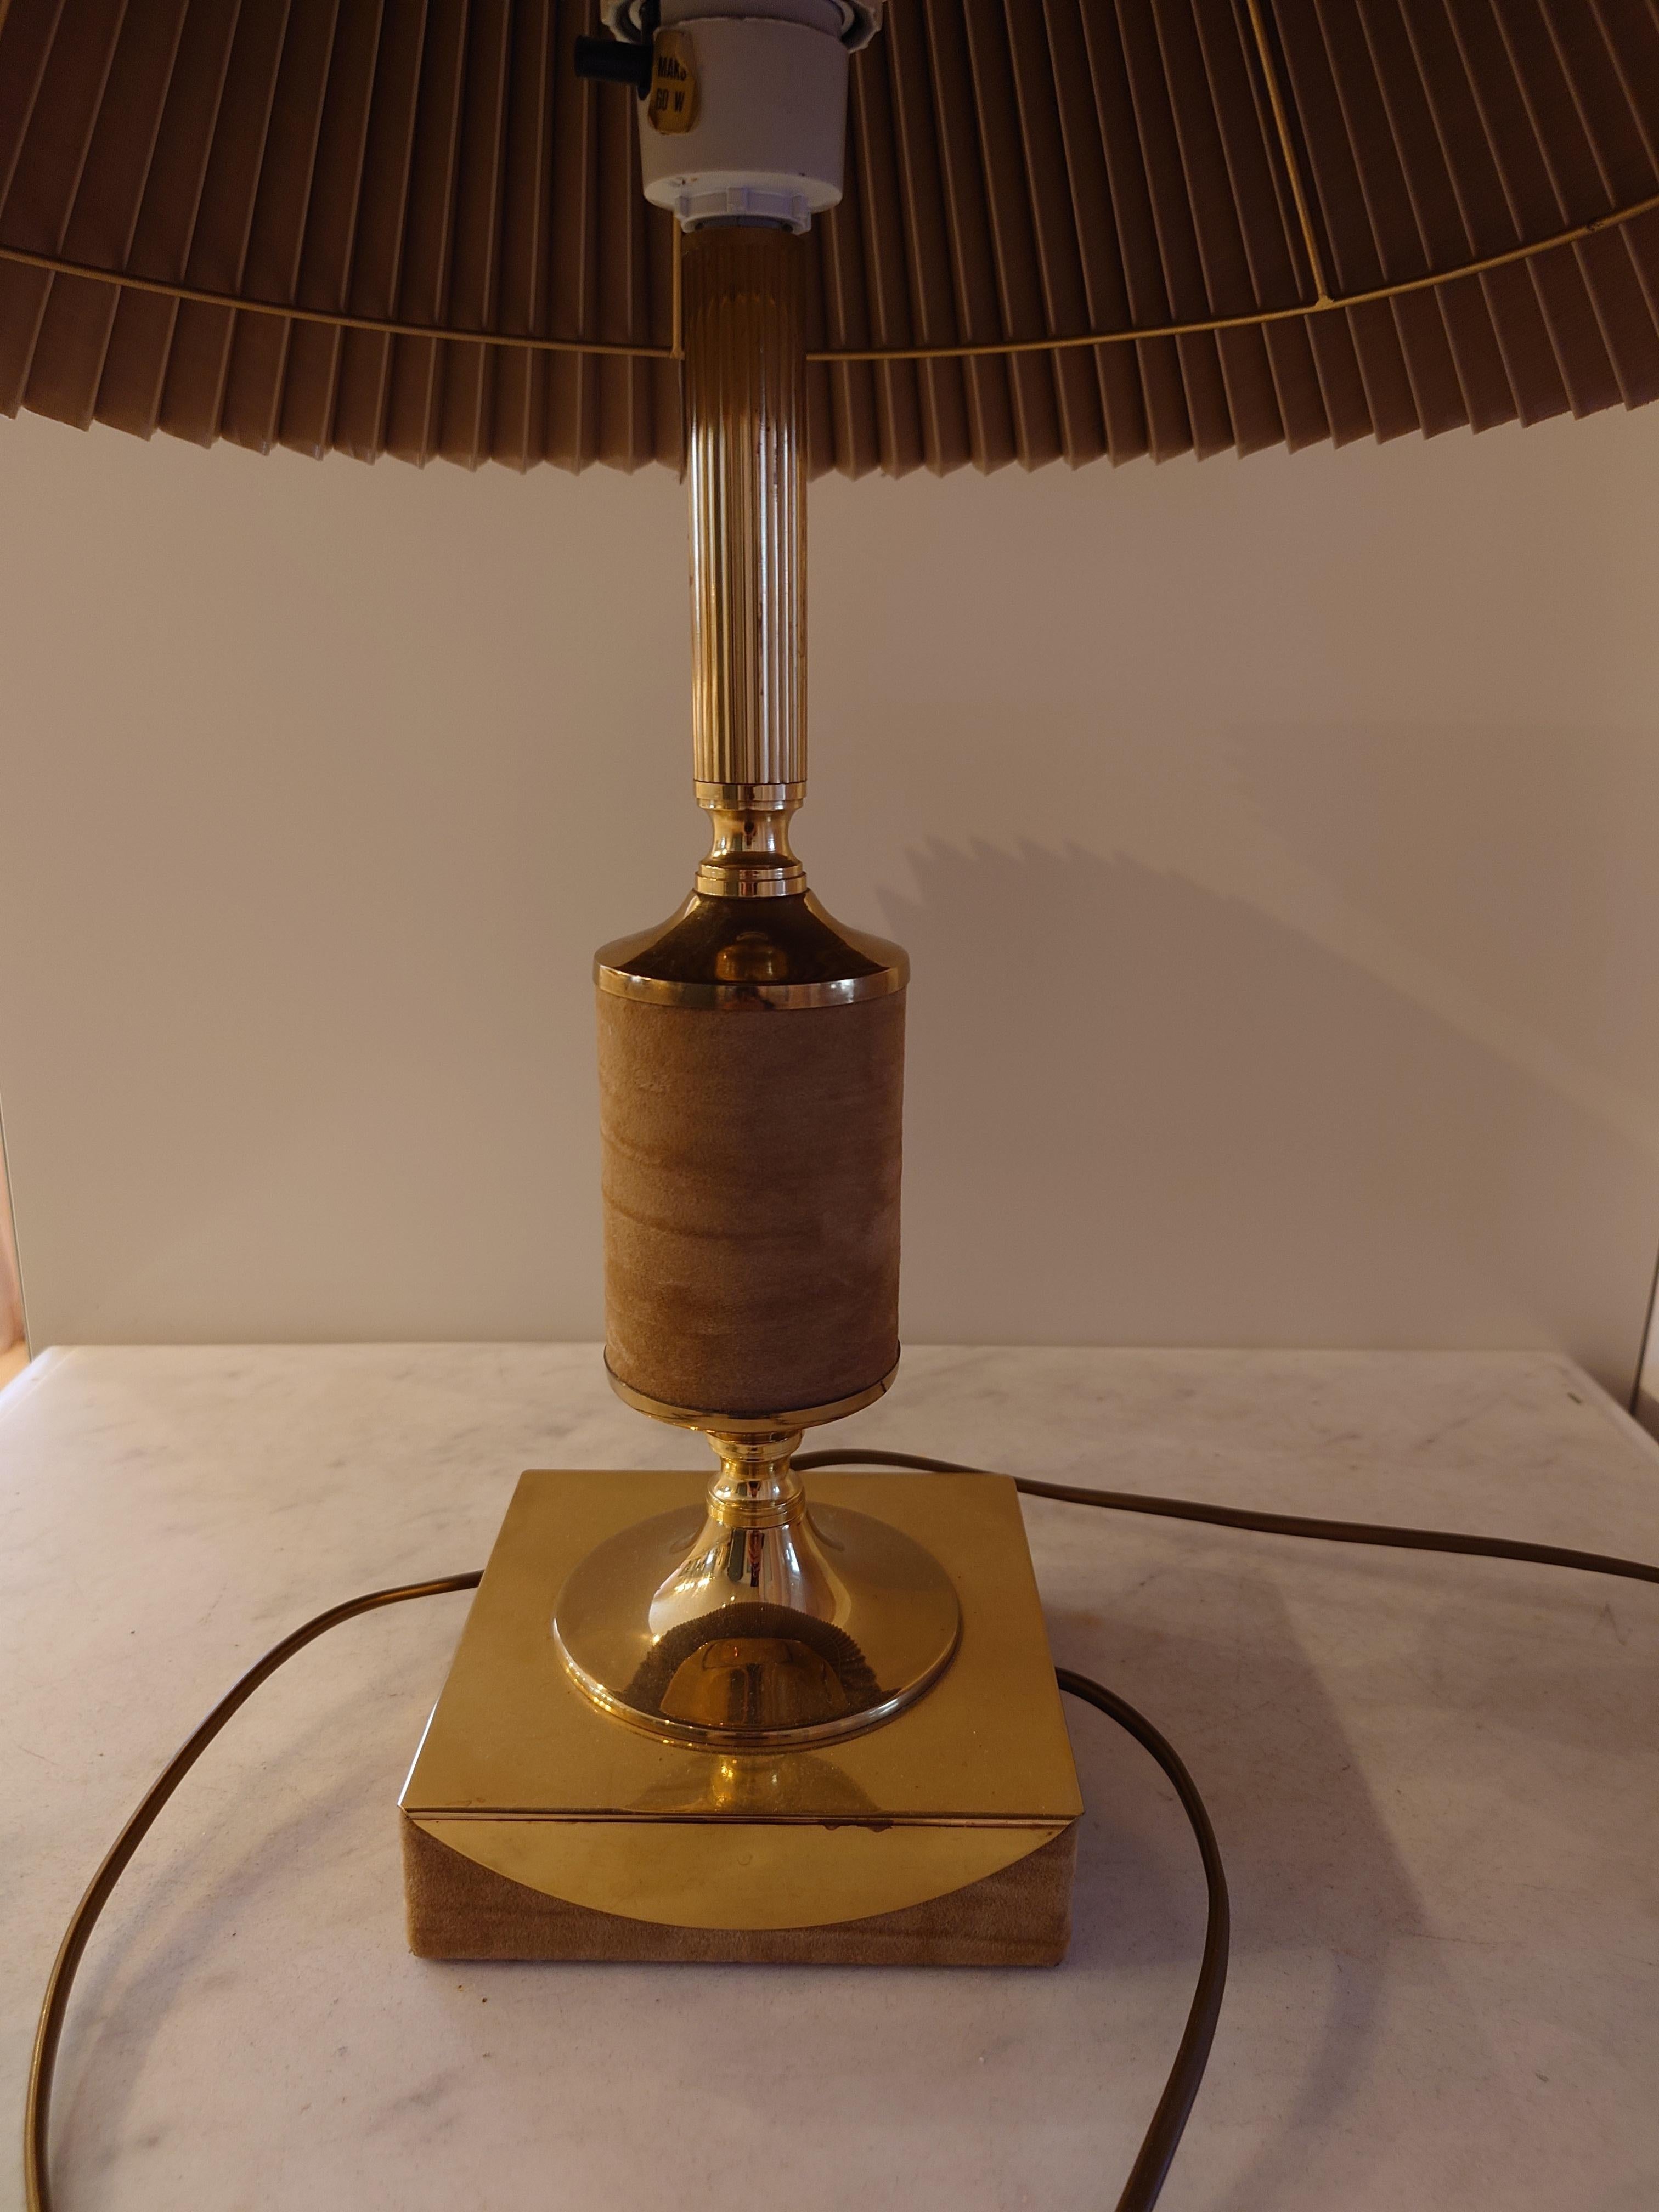 
Tr & Company is a Norwegian lamp manufacturer known for their exquisite designs. They have created a stylish table lamp made of solid brass, which gives it a luxurious and sturdy feel. The lamp features a beautiful pleated lampshade with a